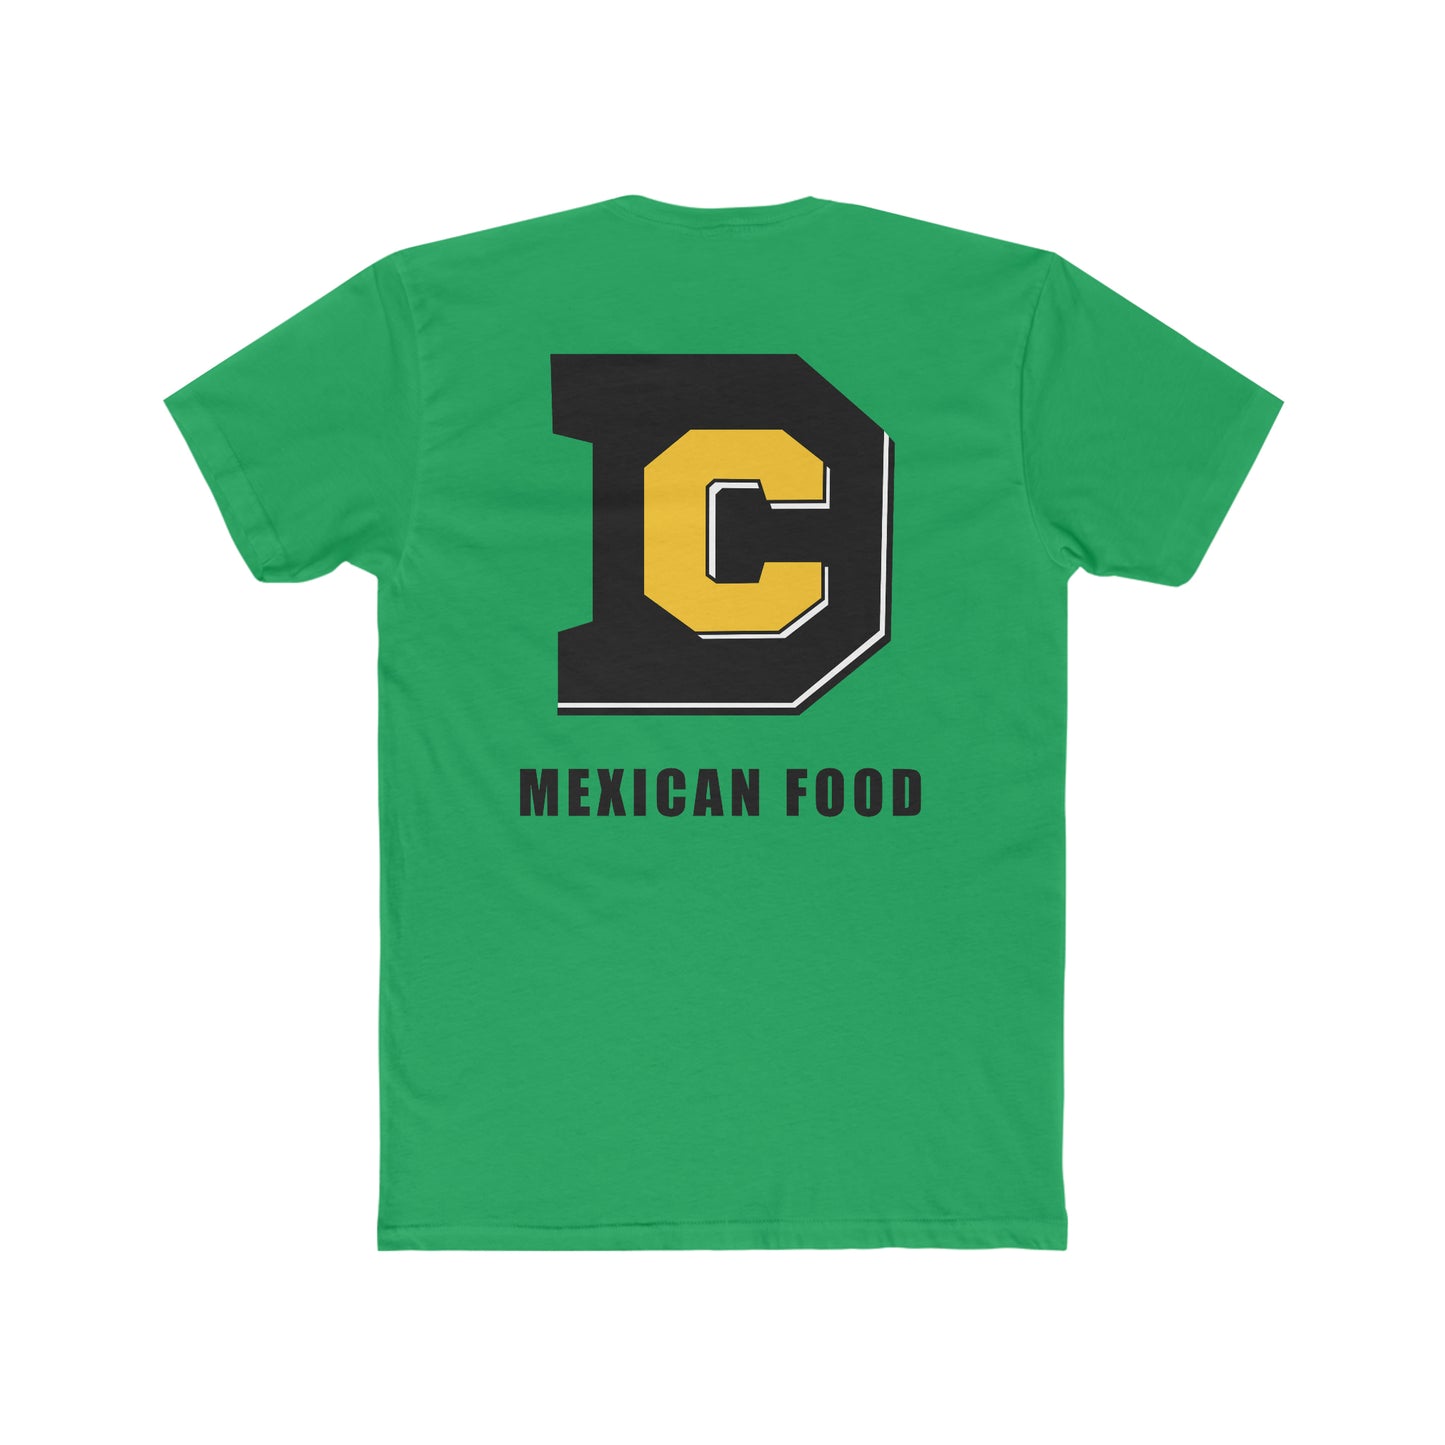 DC Mexican Food Black 2 sided  Cotton Crew Tee Next Level 3600